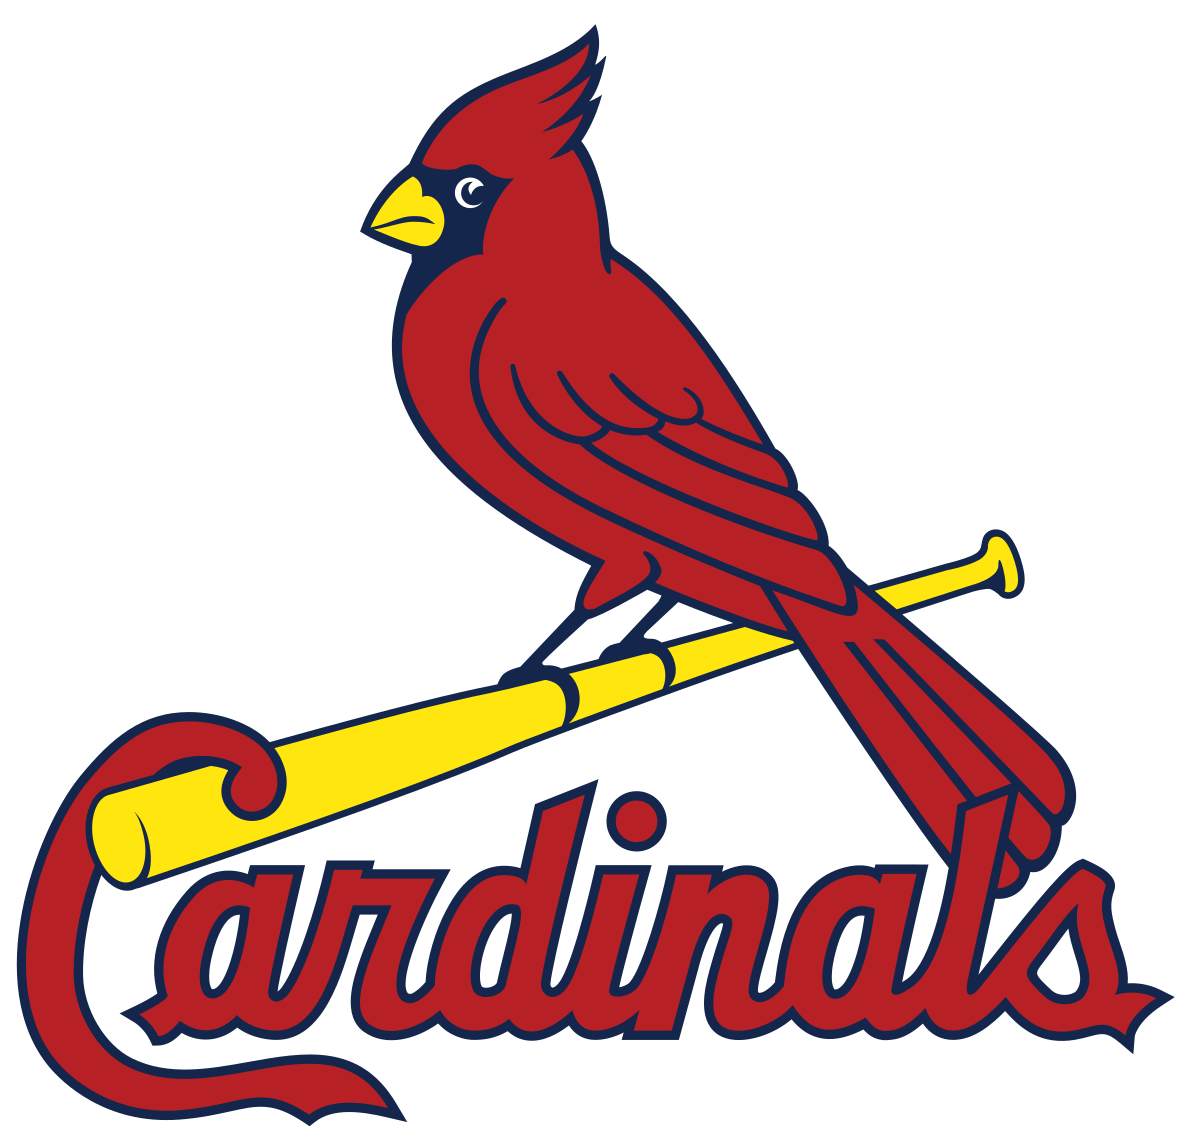 UNBELIEVABLE: The cardinals has dismiss two star player due to...f